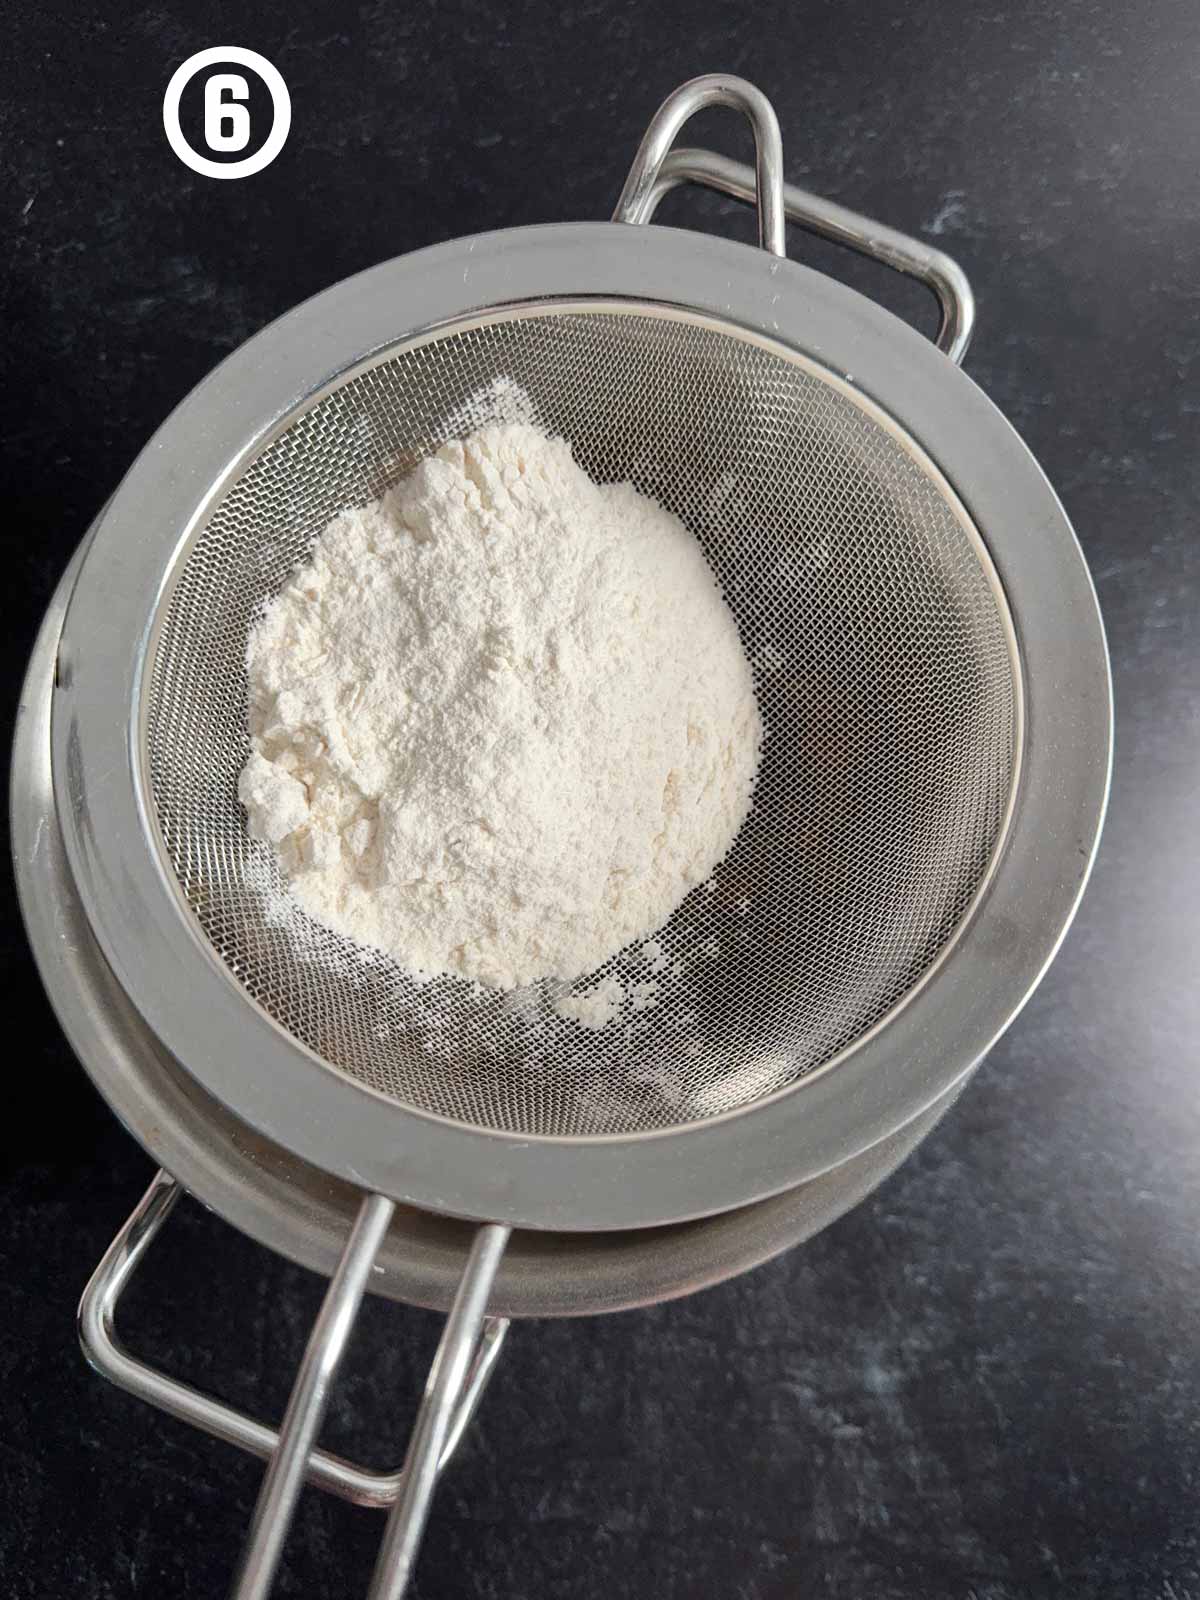 Flour in a metal strainer on a table.